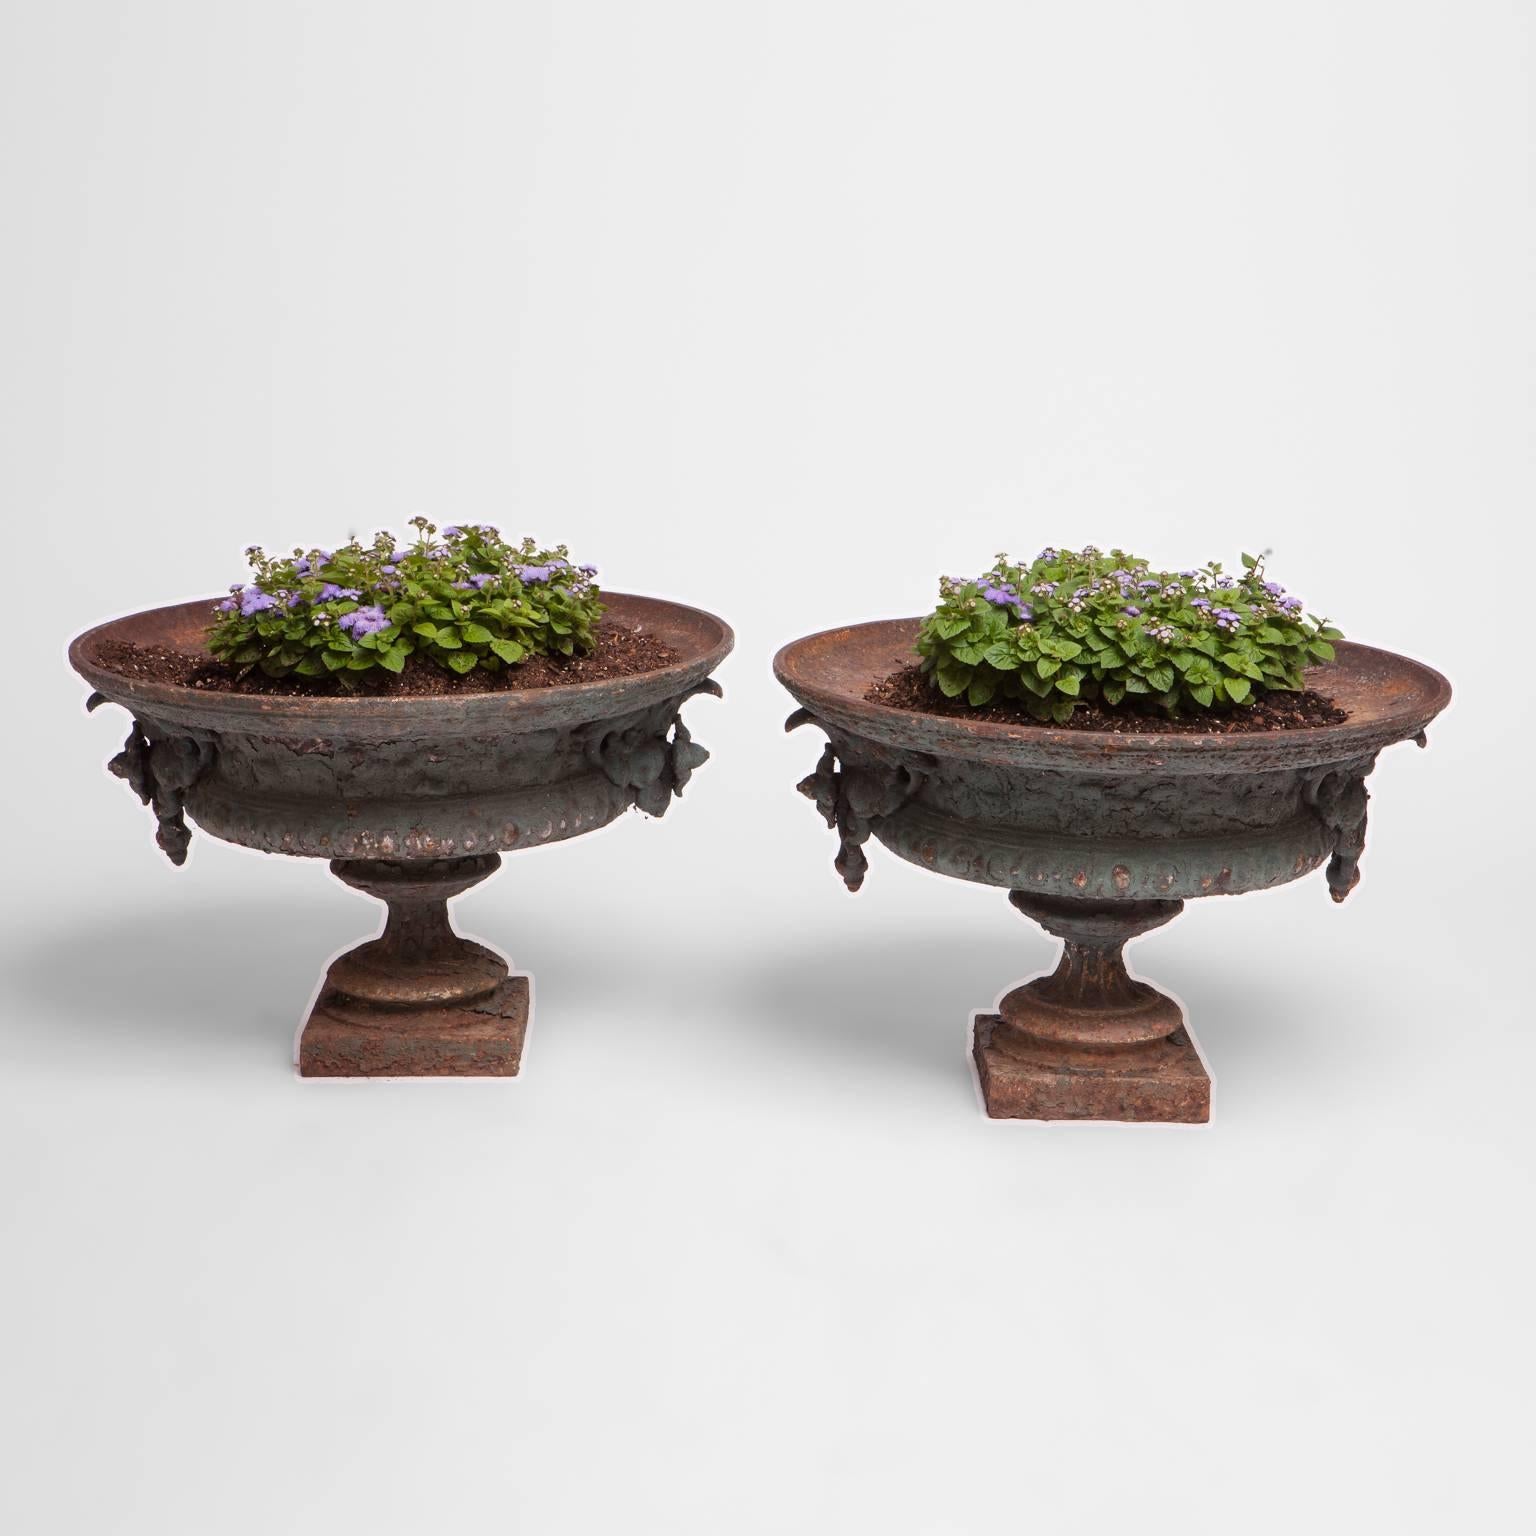 Pair of 19th century French iron urn planters with original green paint and natural patination. Classic pedestal urns with intricate floral motif on either side of urn with egg and dart motif decorating the perimeter edges.